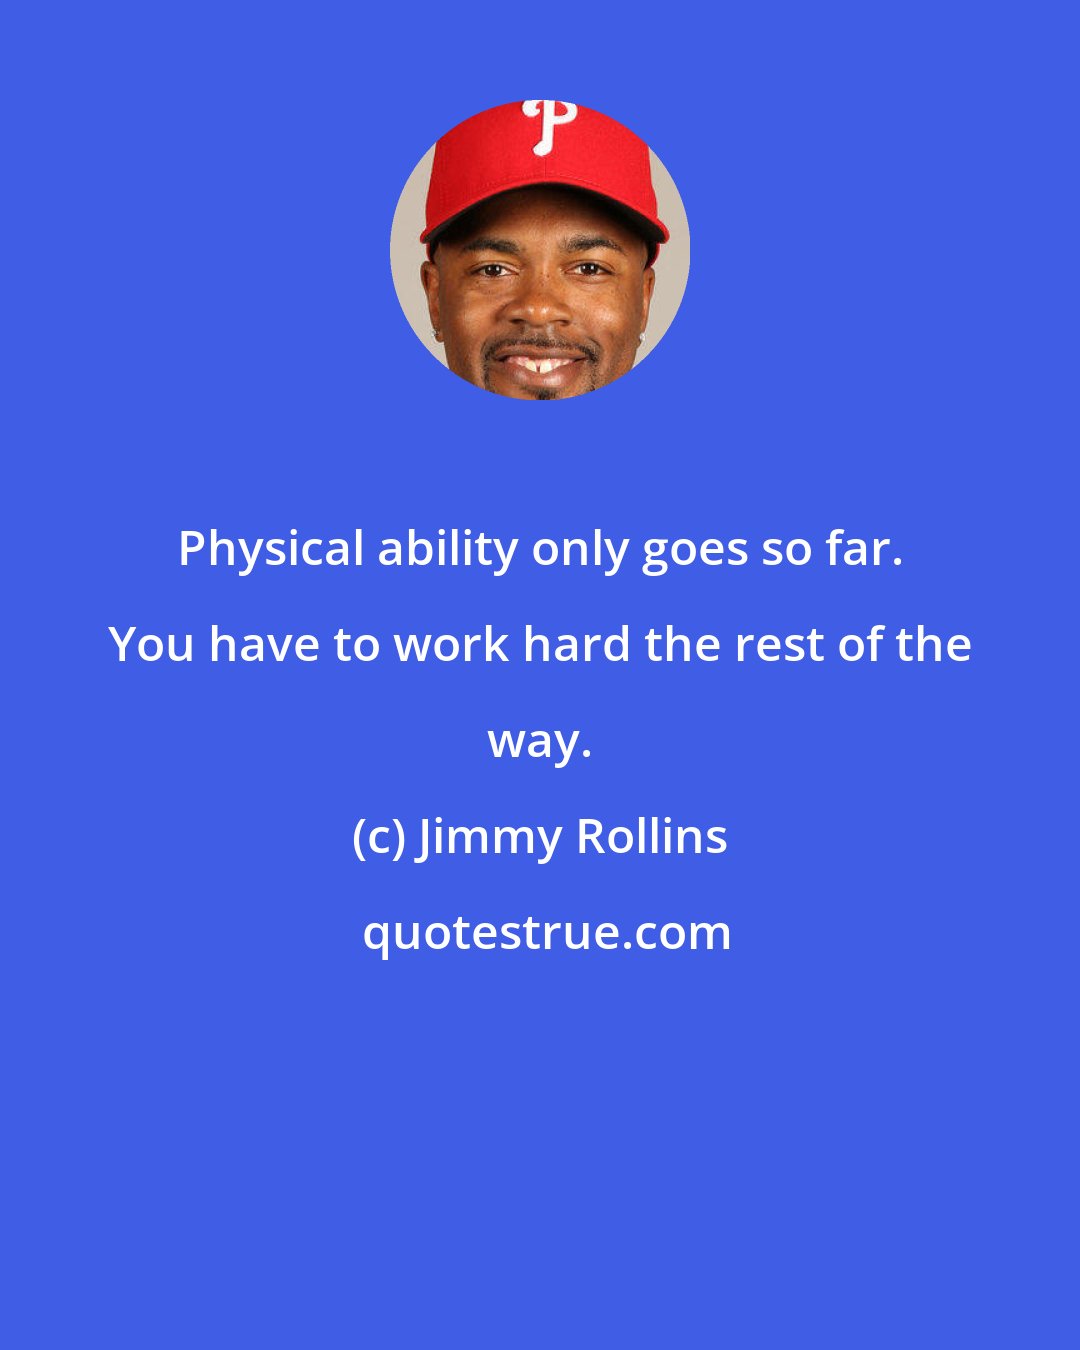 Jimmy Rollins: Physical ability only goes so far. You have to work hard the rest of the way.